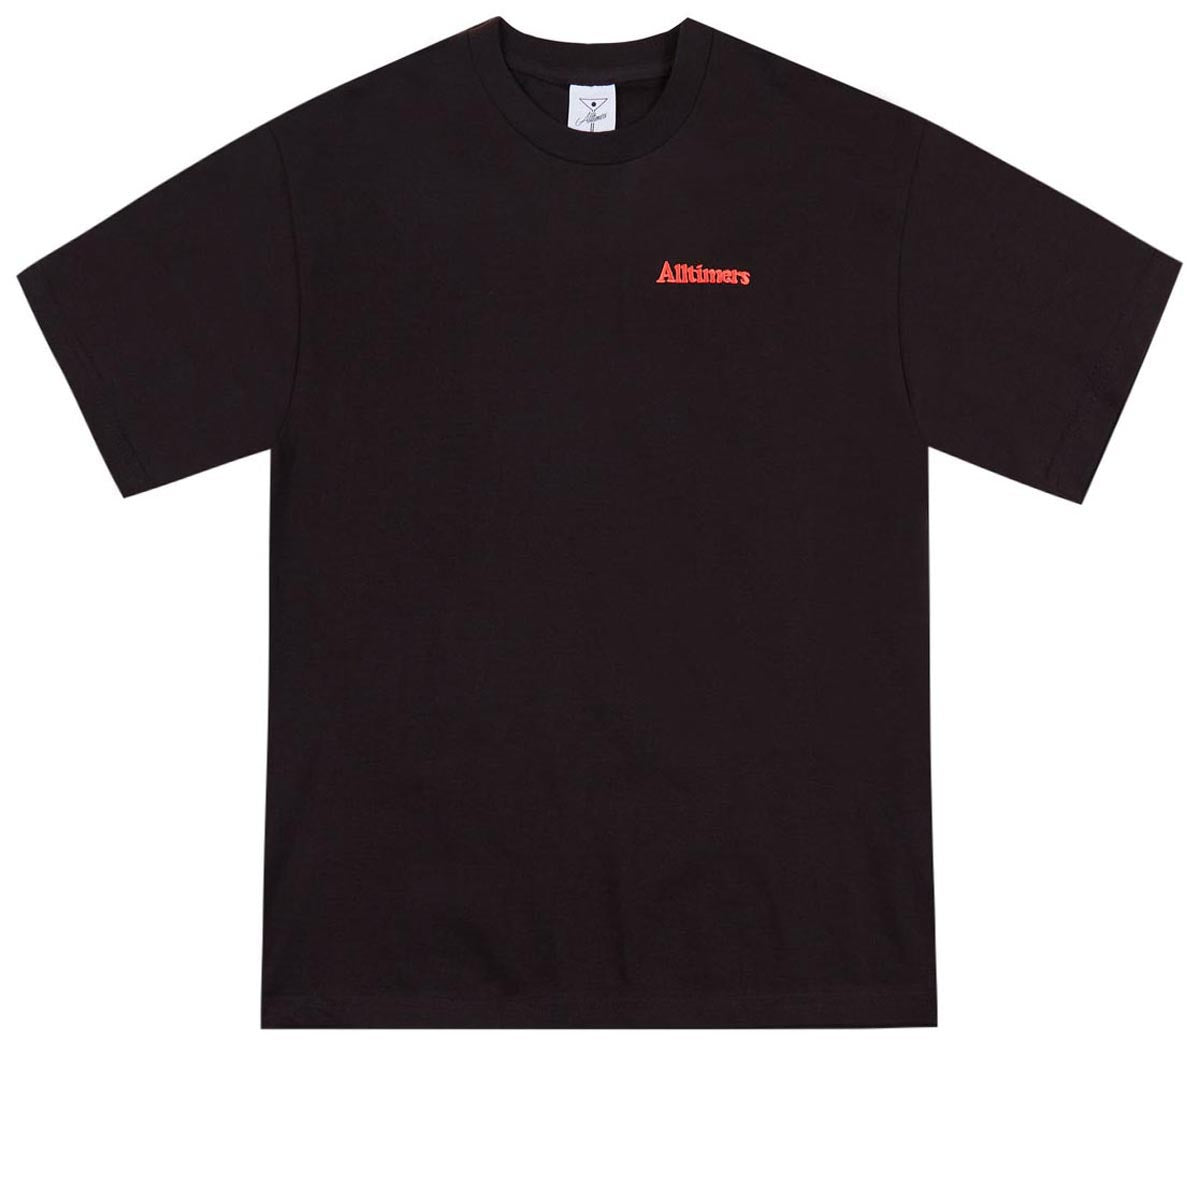 Alltimers Tiny Broadway Embroidered T-Shirt - Black image 1